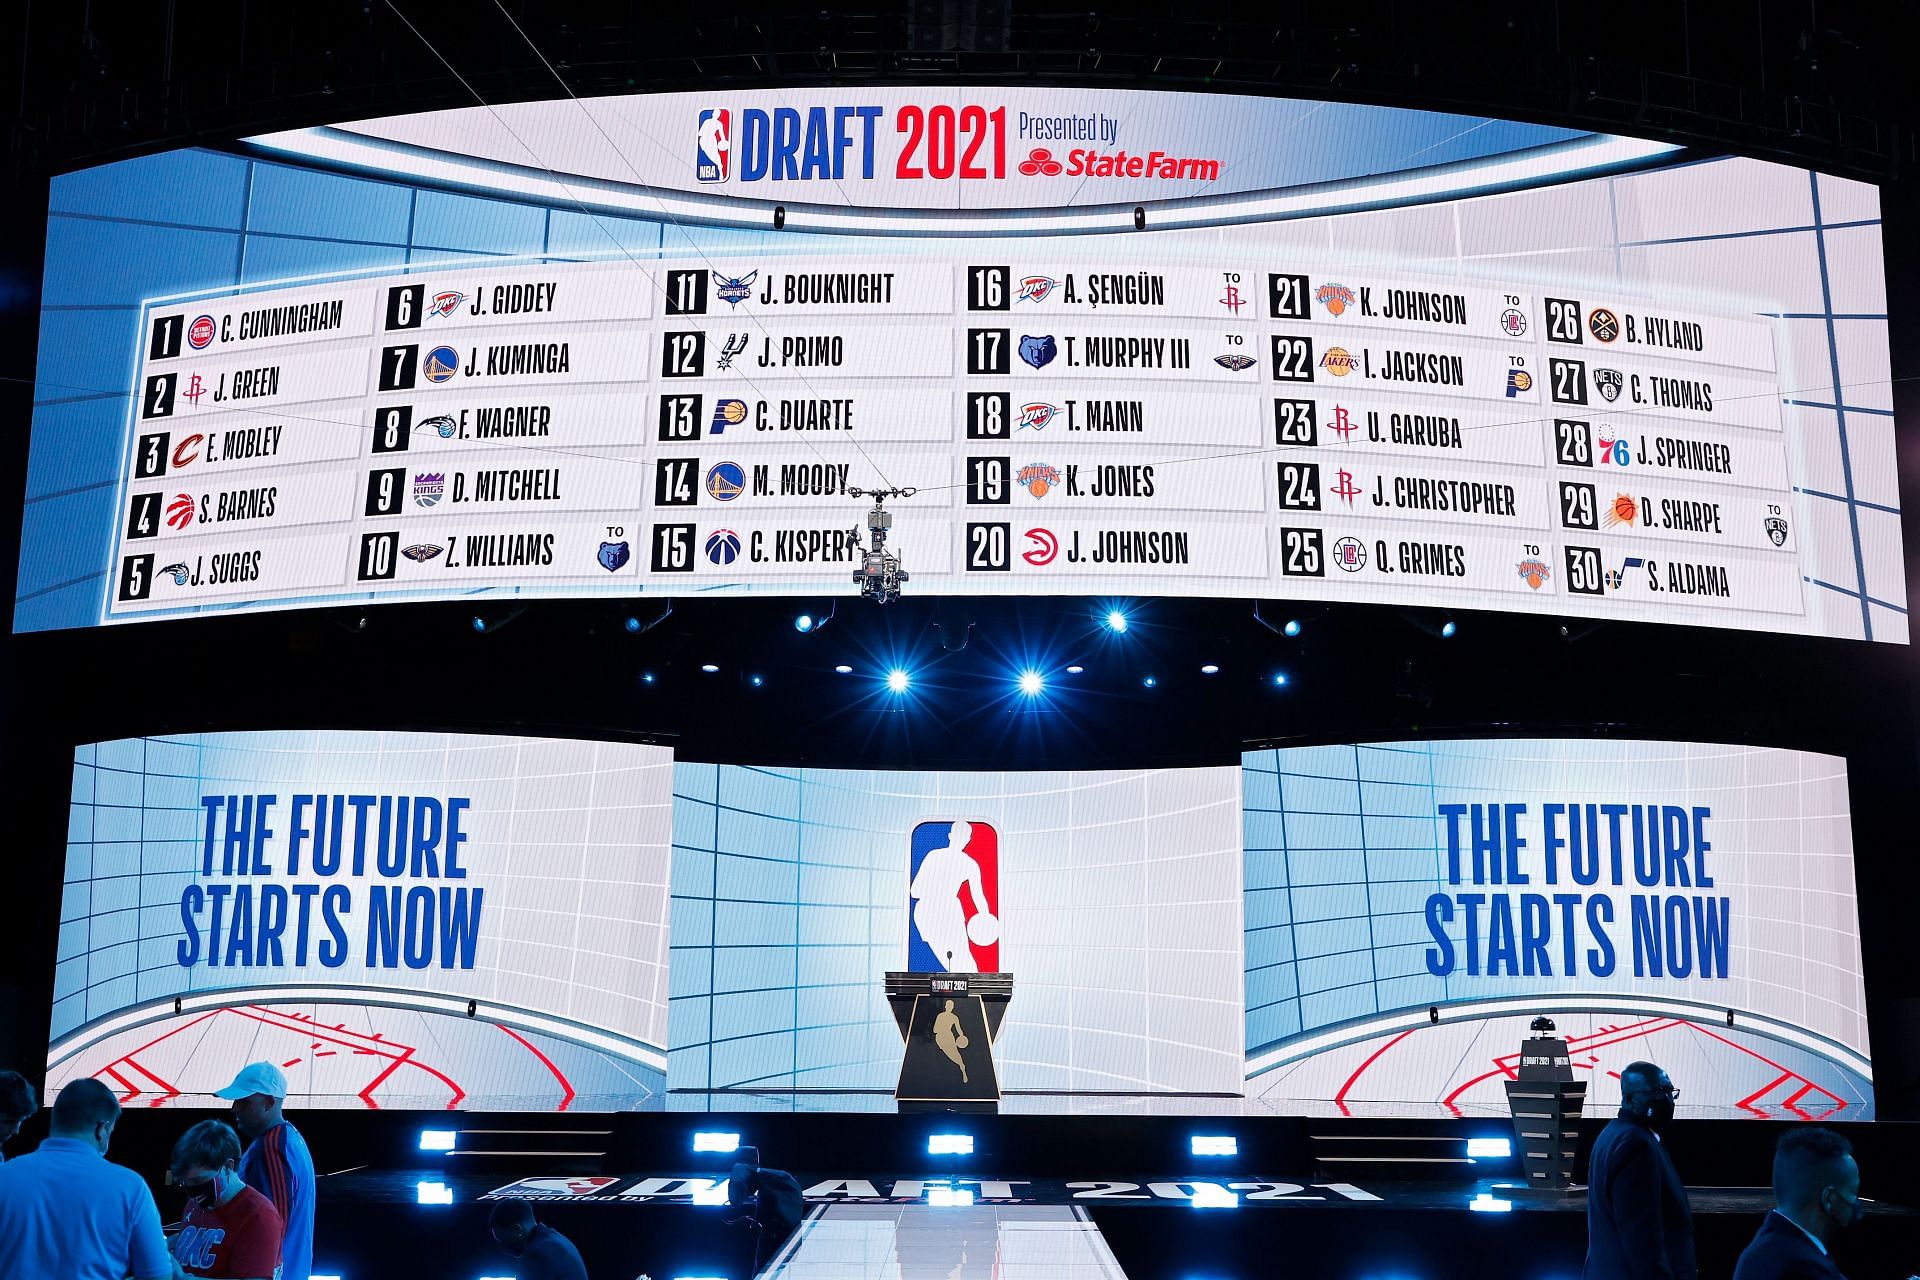 Some key contributors snuck into the first round of the 2021 NBA draft, and more will do the same in 2022.